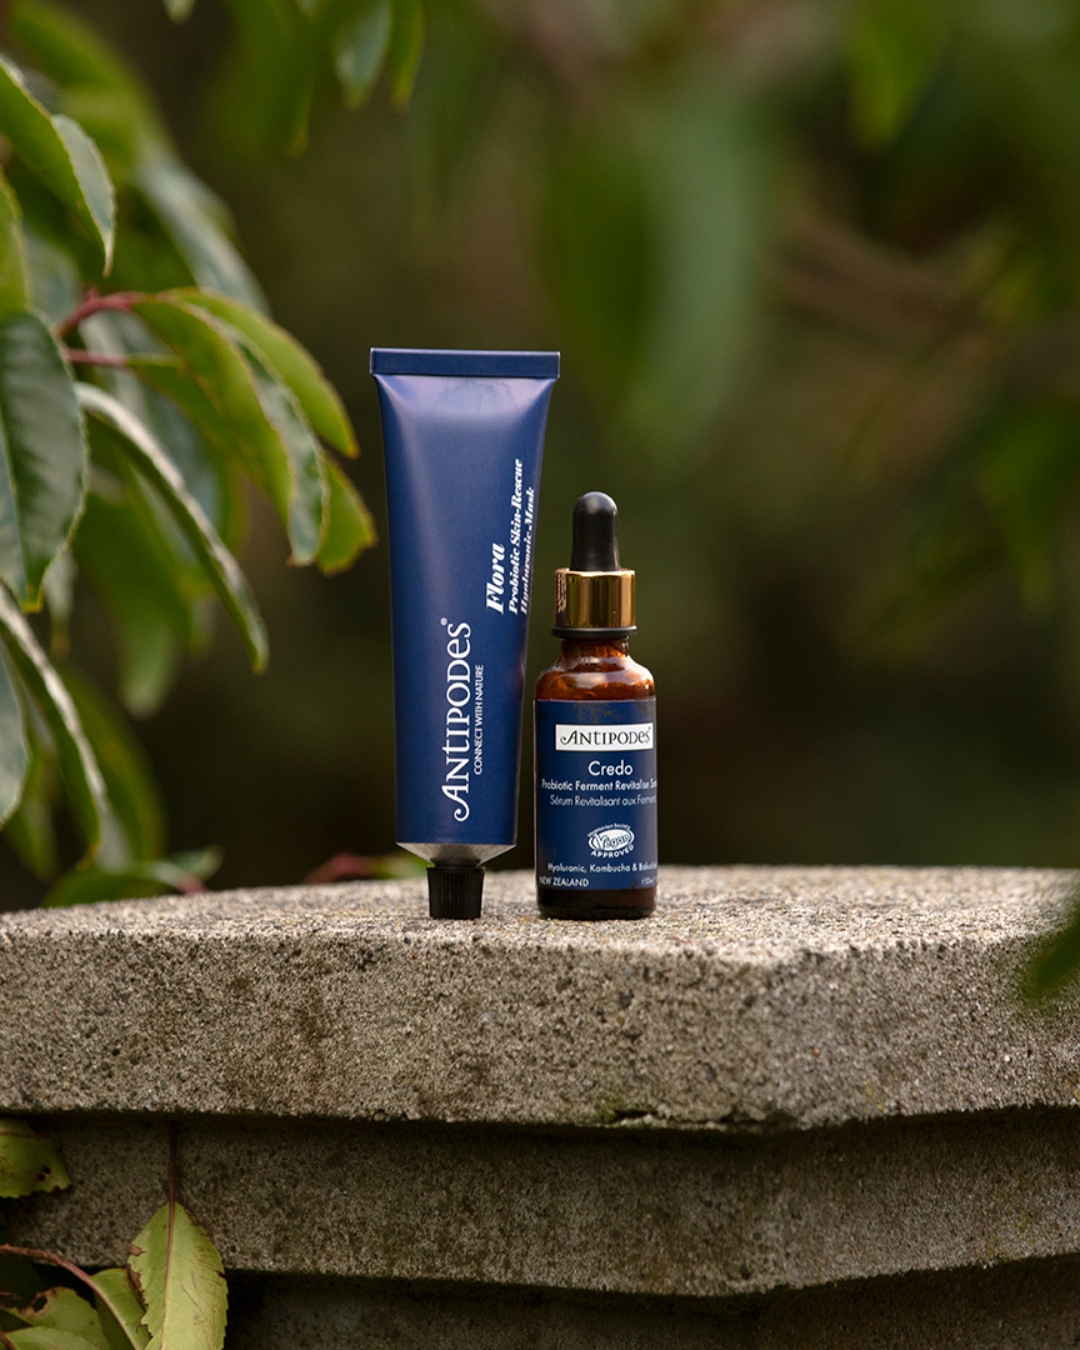 A tube and dropper of Antipodes skincare products with dark blue packaging with green leaves in the background.